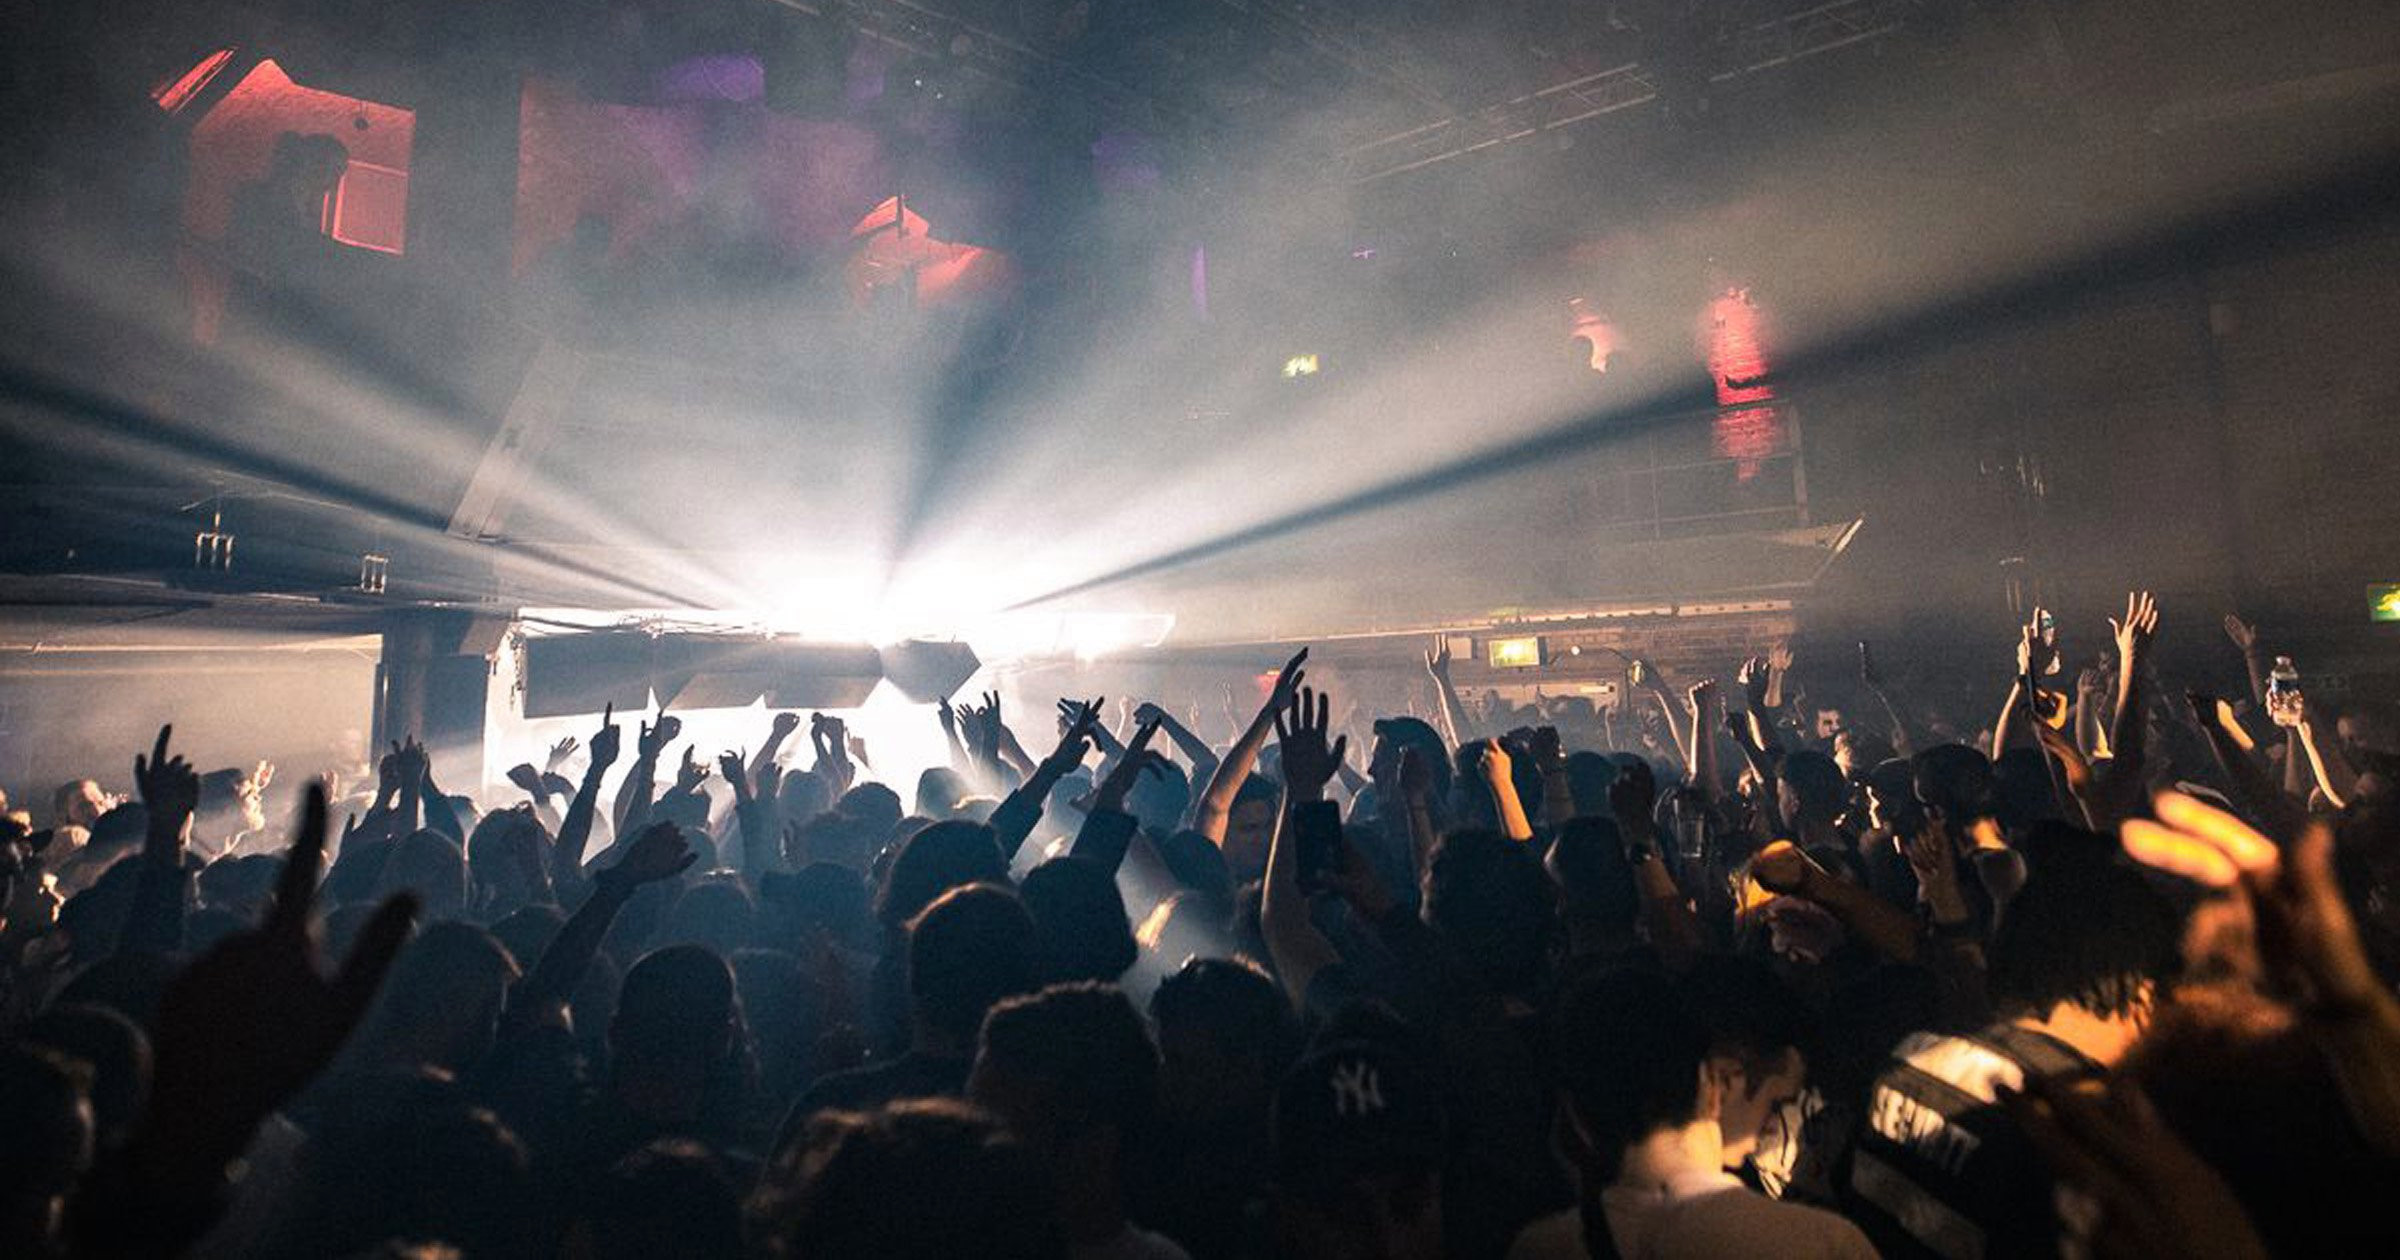 London’s Fabric is hosting a huge 39-hour birthday party